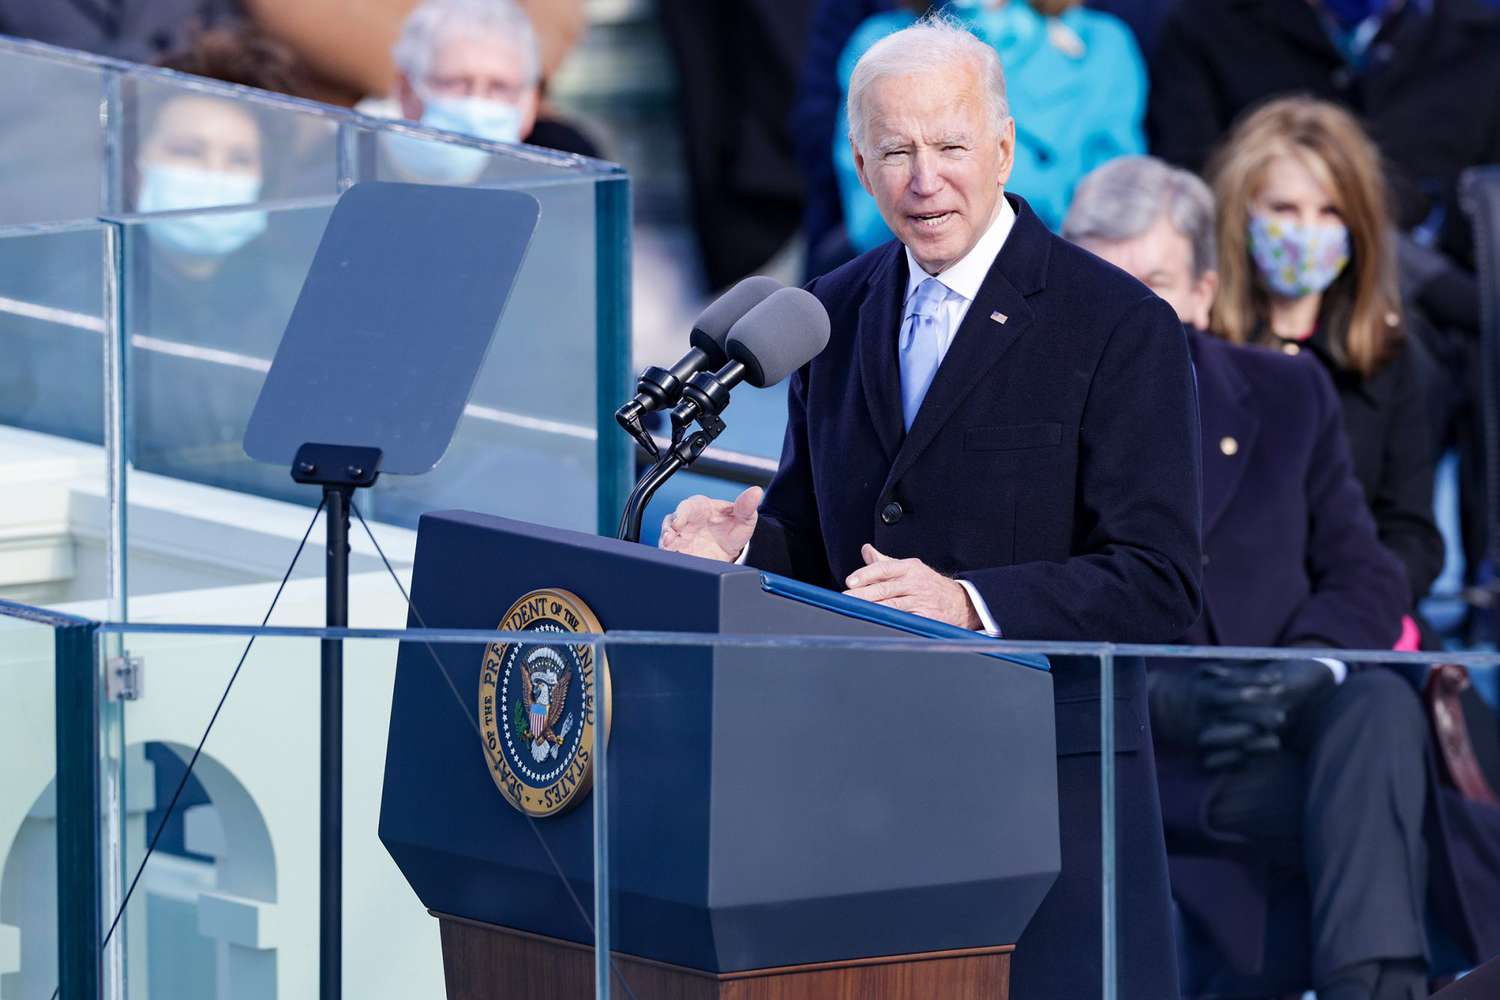 U.S. President Joe Biden delivers his inaugural address on the West Front of the U.S. Capitol on January 20, 2021